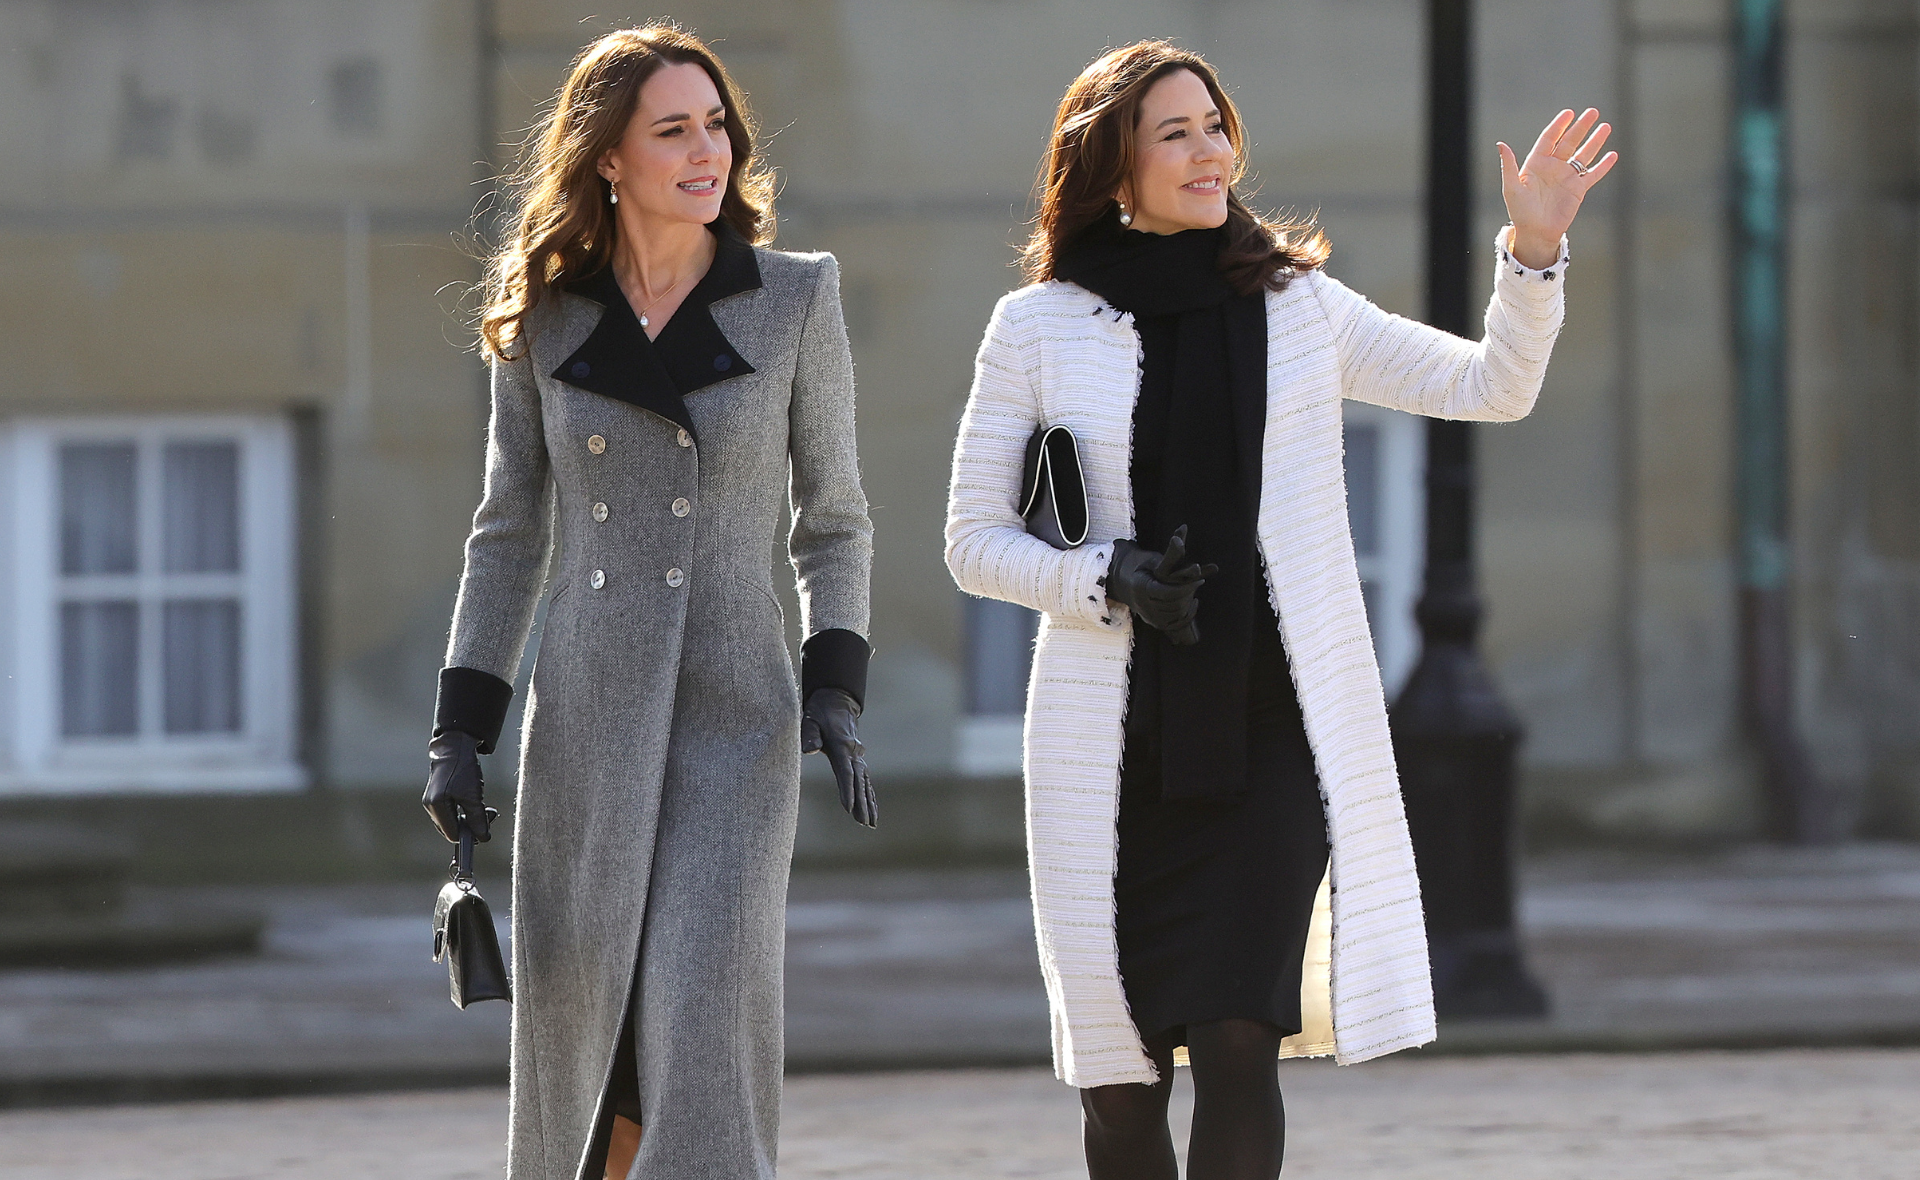 Kate Middleton reaches out to old friend, Princess Mary amid family drama